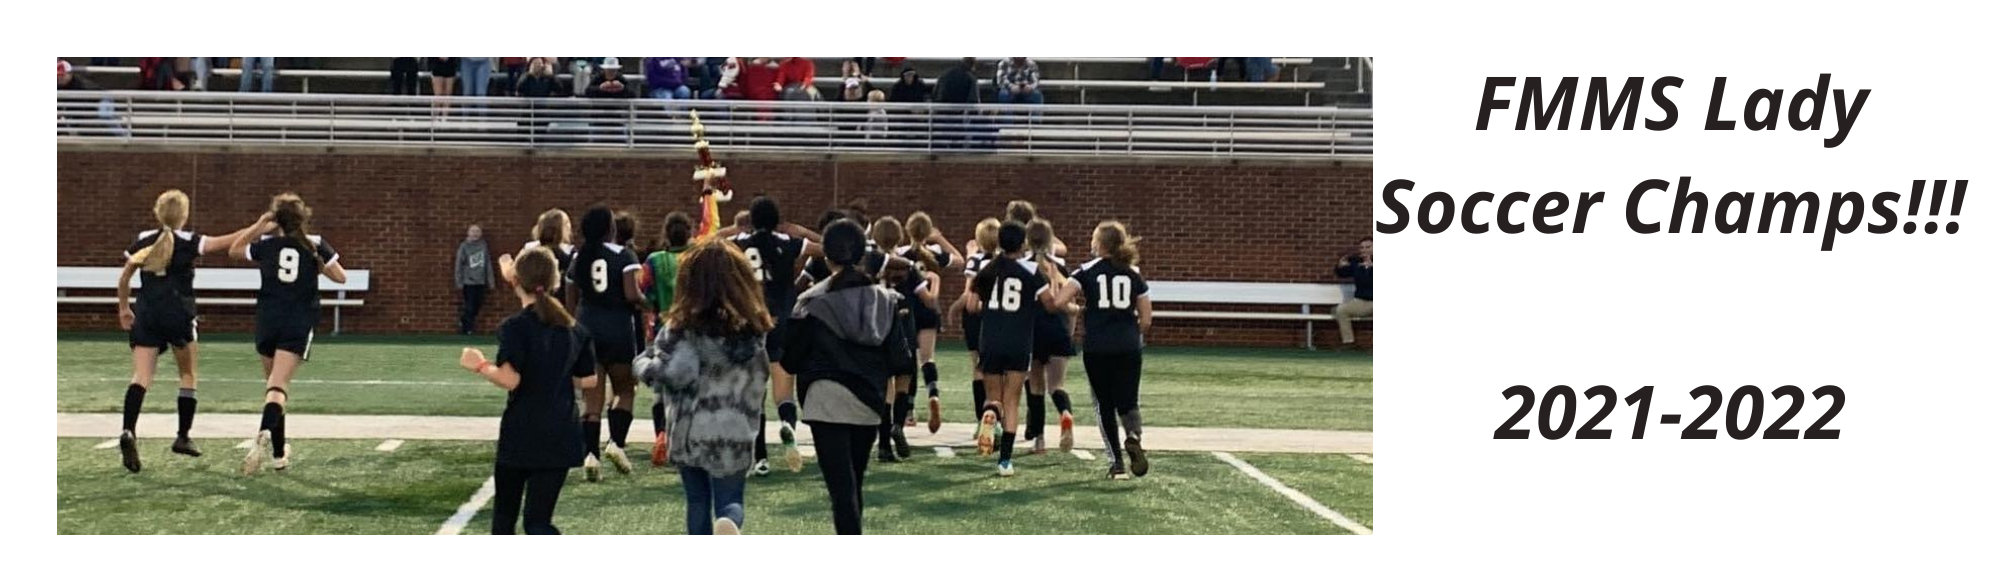 FMMS Lady Soccer Champions 2021-2022